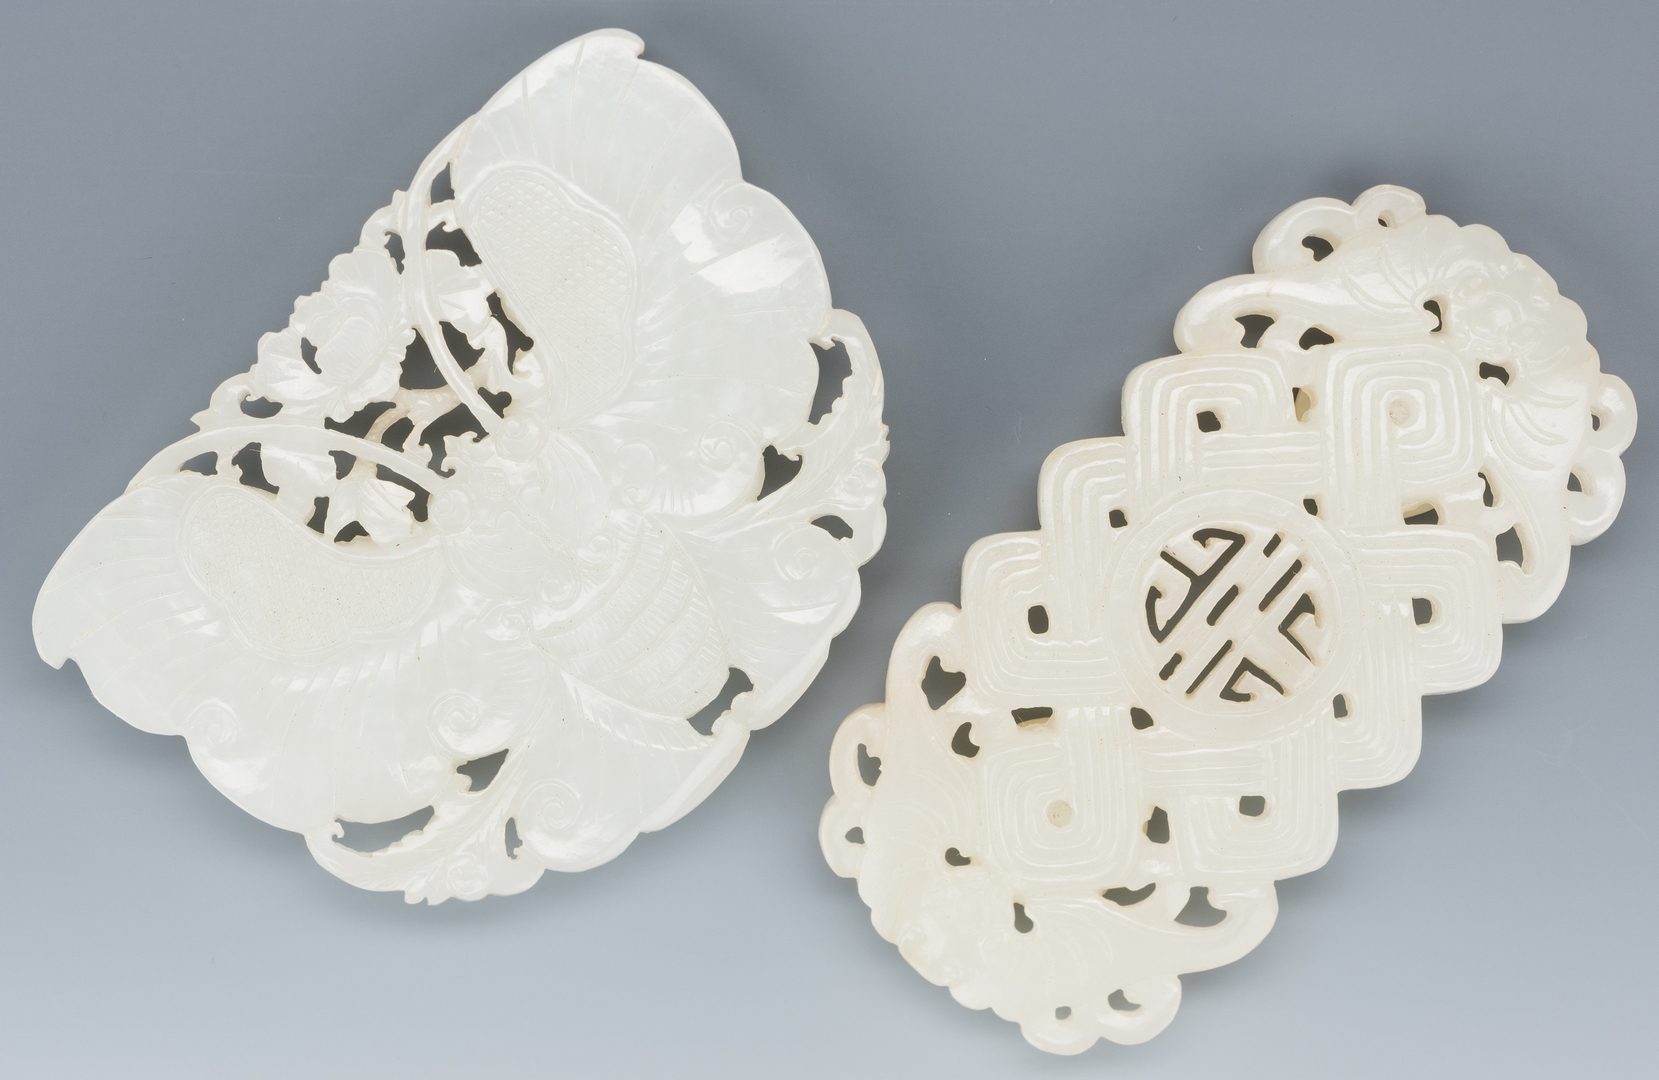 Lot 1: 2 Chinese White/Pale Celadon Carved Belt Buckles